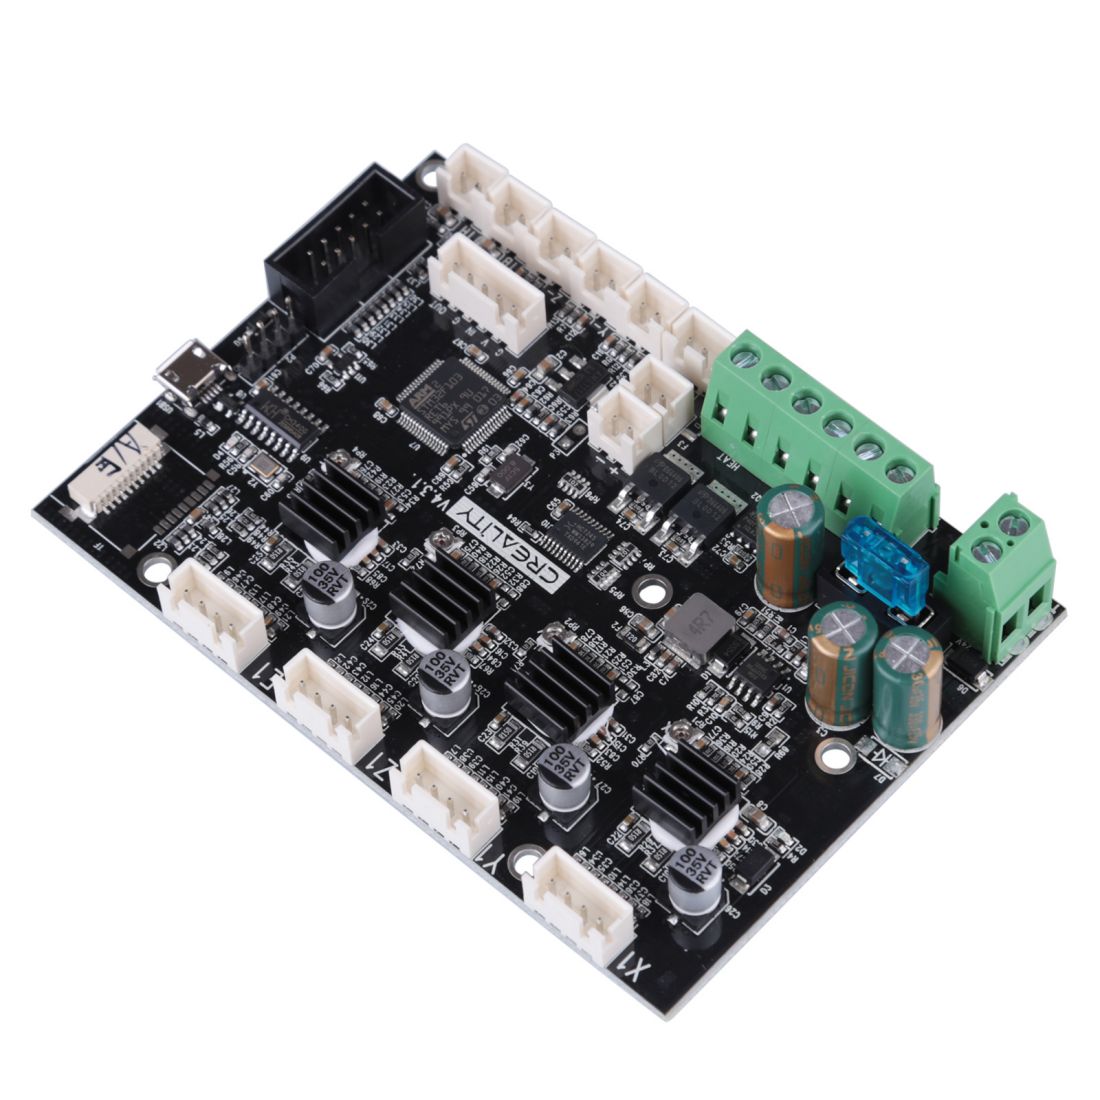 Creality Ender-6 Silent Motherboard (Firmware Preconfigured)